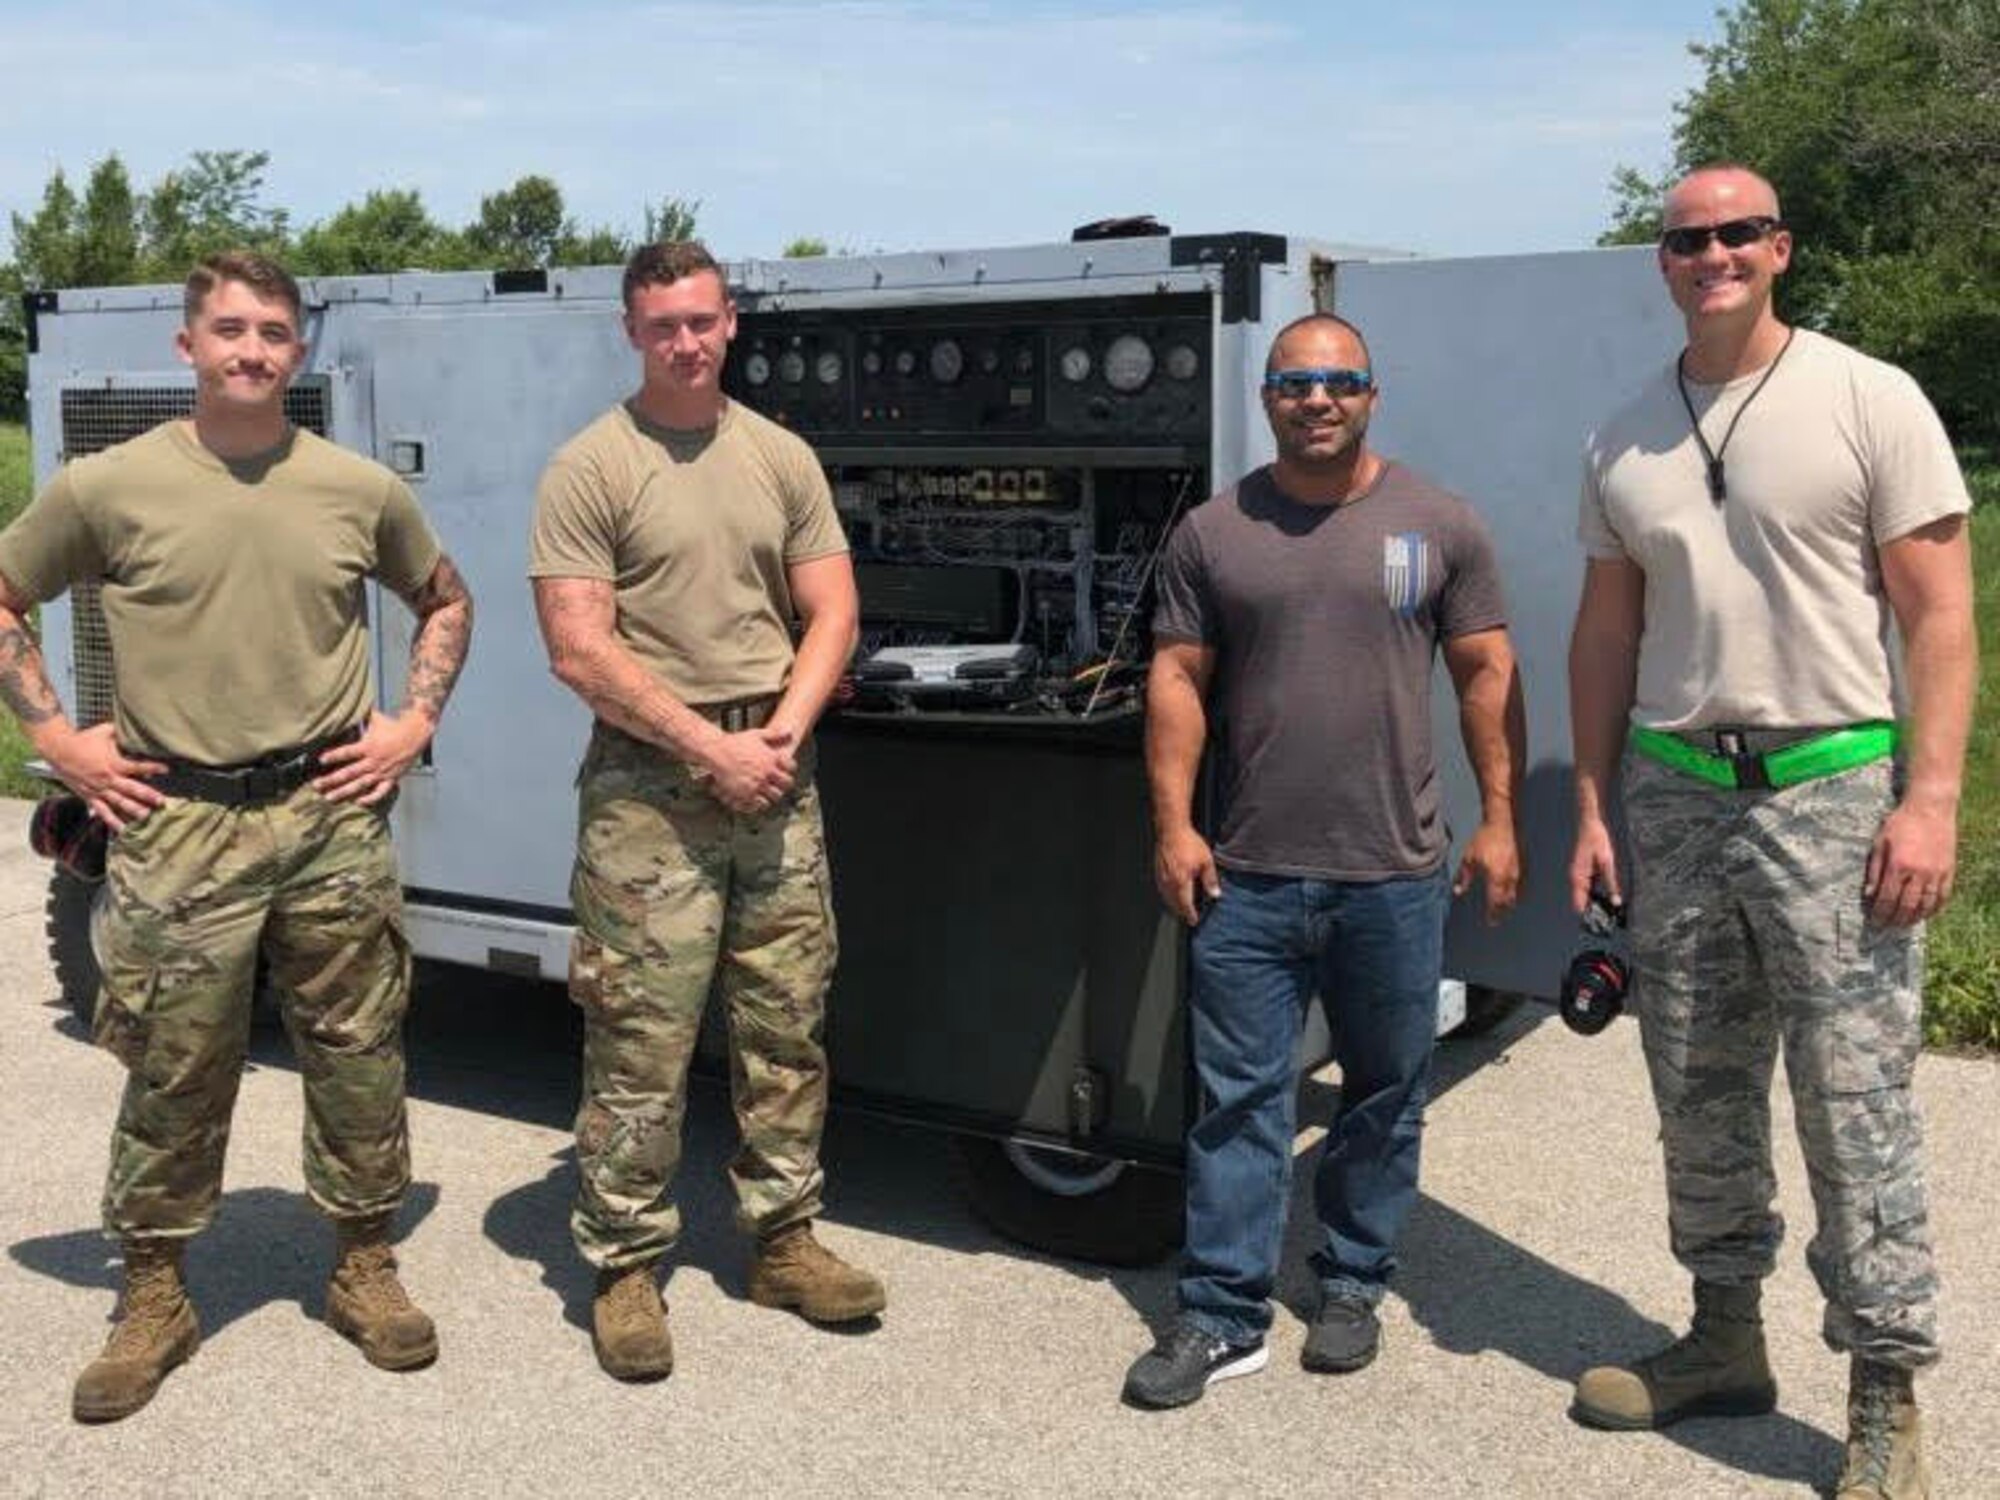 Airmen 1st Class Logan Peters and Devin Julia, Ashkan Serat and Master Sgt. Jeremy Longo, pose for a photo on July 18, 2019. They served as part of a multi-organizational team that spent a week testing potential HVAC replacement units at Whiteman Air Force Base, Missouri. (Courtesy photo)